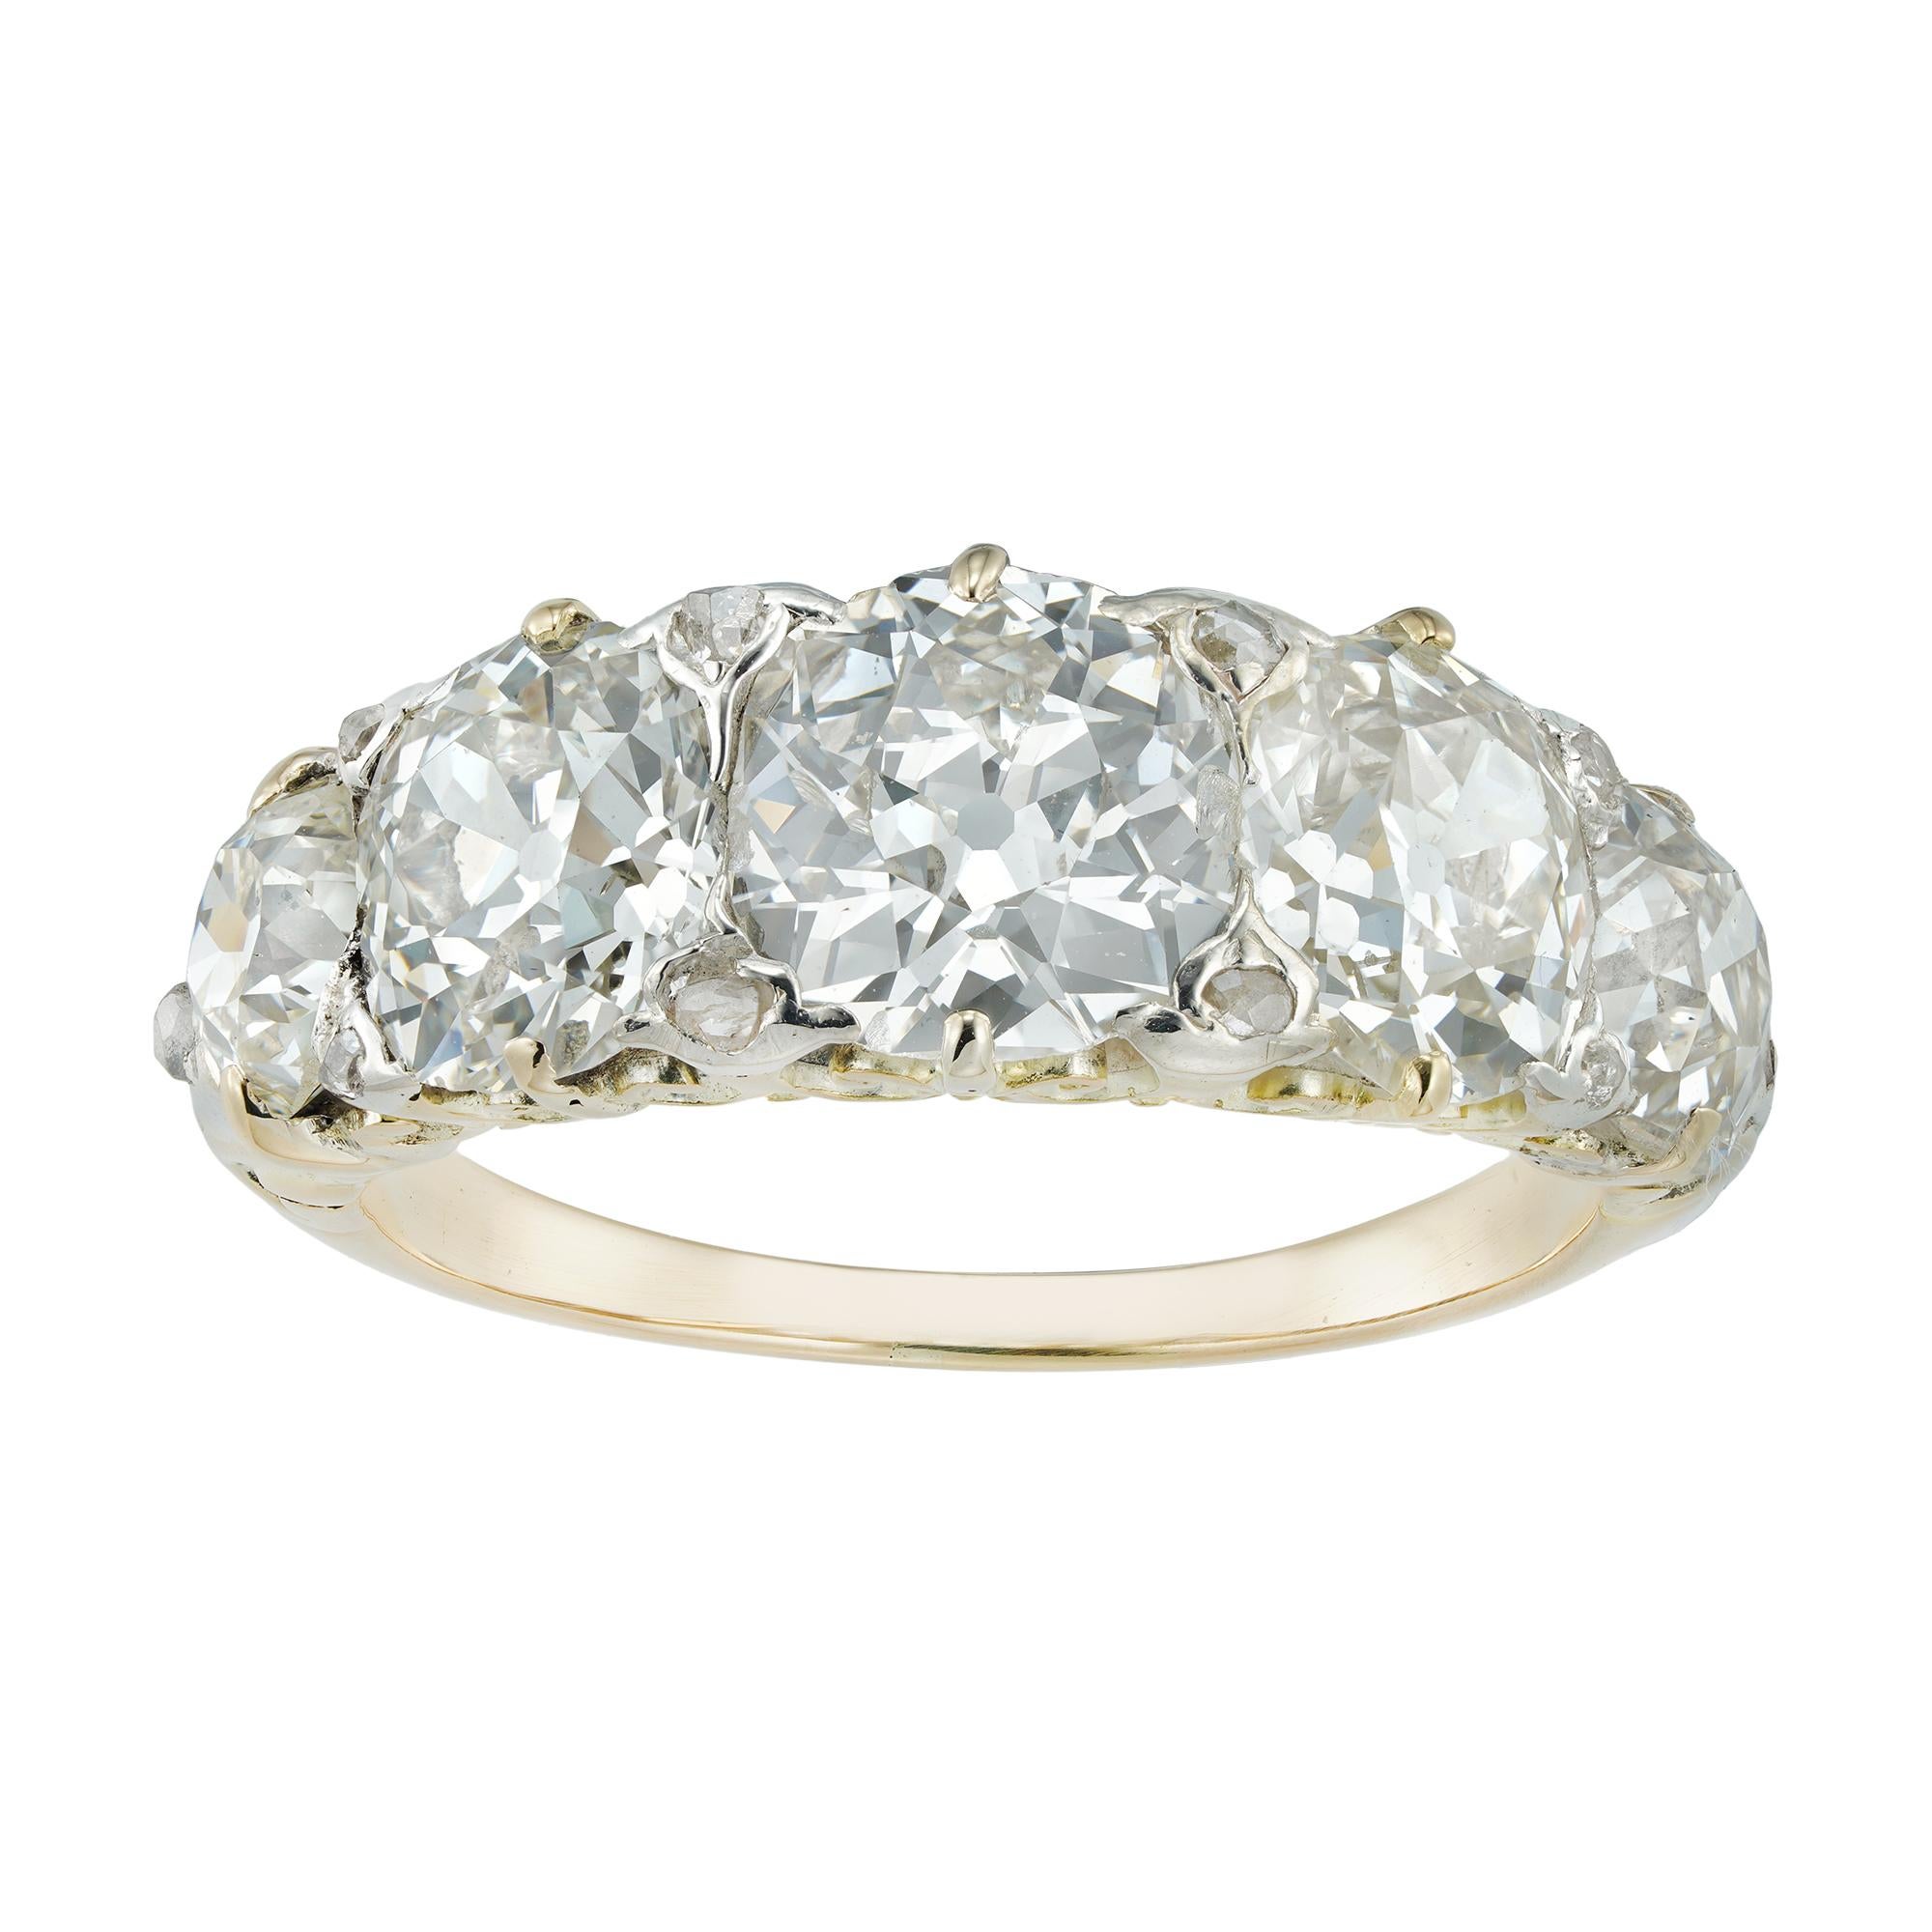 A late Victorian five-stone diamond ring, the five old-cut diamonds graduating from the centre and estimated to weigh 4¾ carats in total, all claw-set with rose-cut diamond in-between, to a silver and yellow gold mount, with scroll pierced mount and